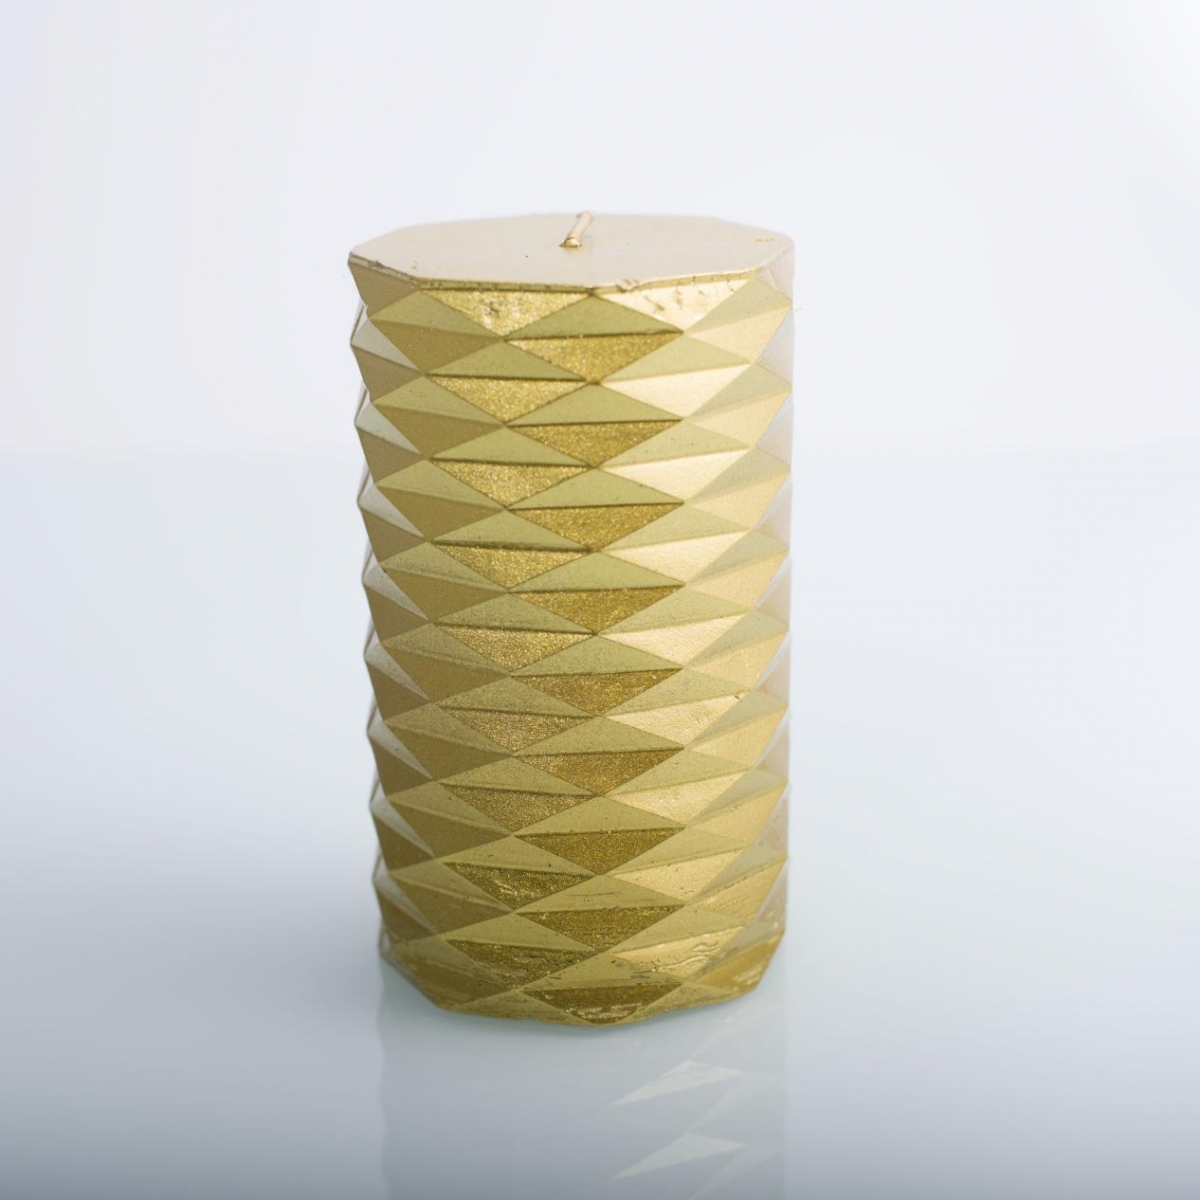 Pillar Candles：Big Size, Diamond Cut, Gold Color, Soy Wax, Chrstmas Decoration, China Factory, Cheap Price-HOWCANDLE-Candles,Scented Candles,Aromatherapy Candles,Soy Candles,Vegan Candles,Jar Candles,Pillar Candles,Candle Gift Sets,Essential Oils,Reed Diffuser,Candle Holder,